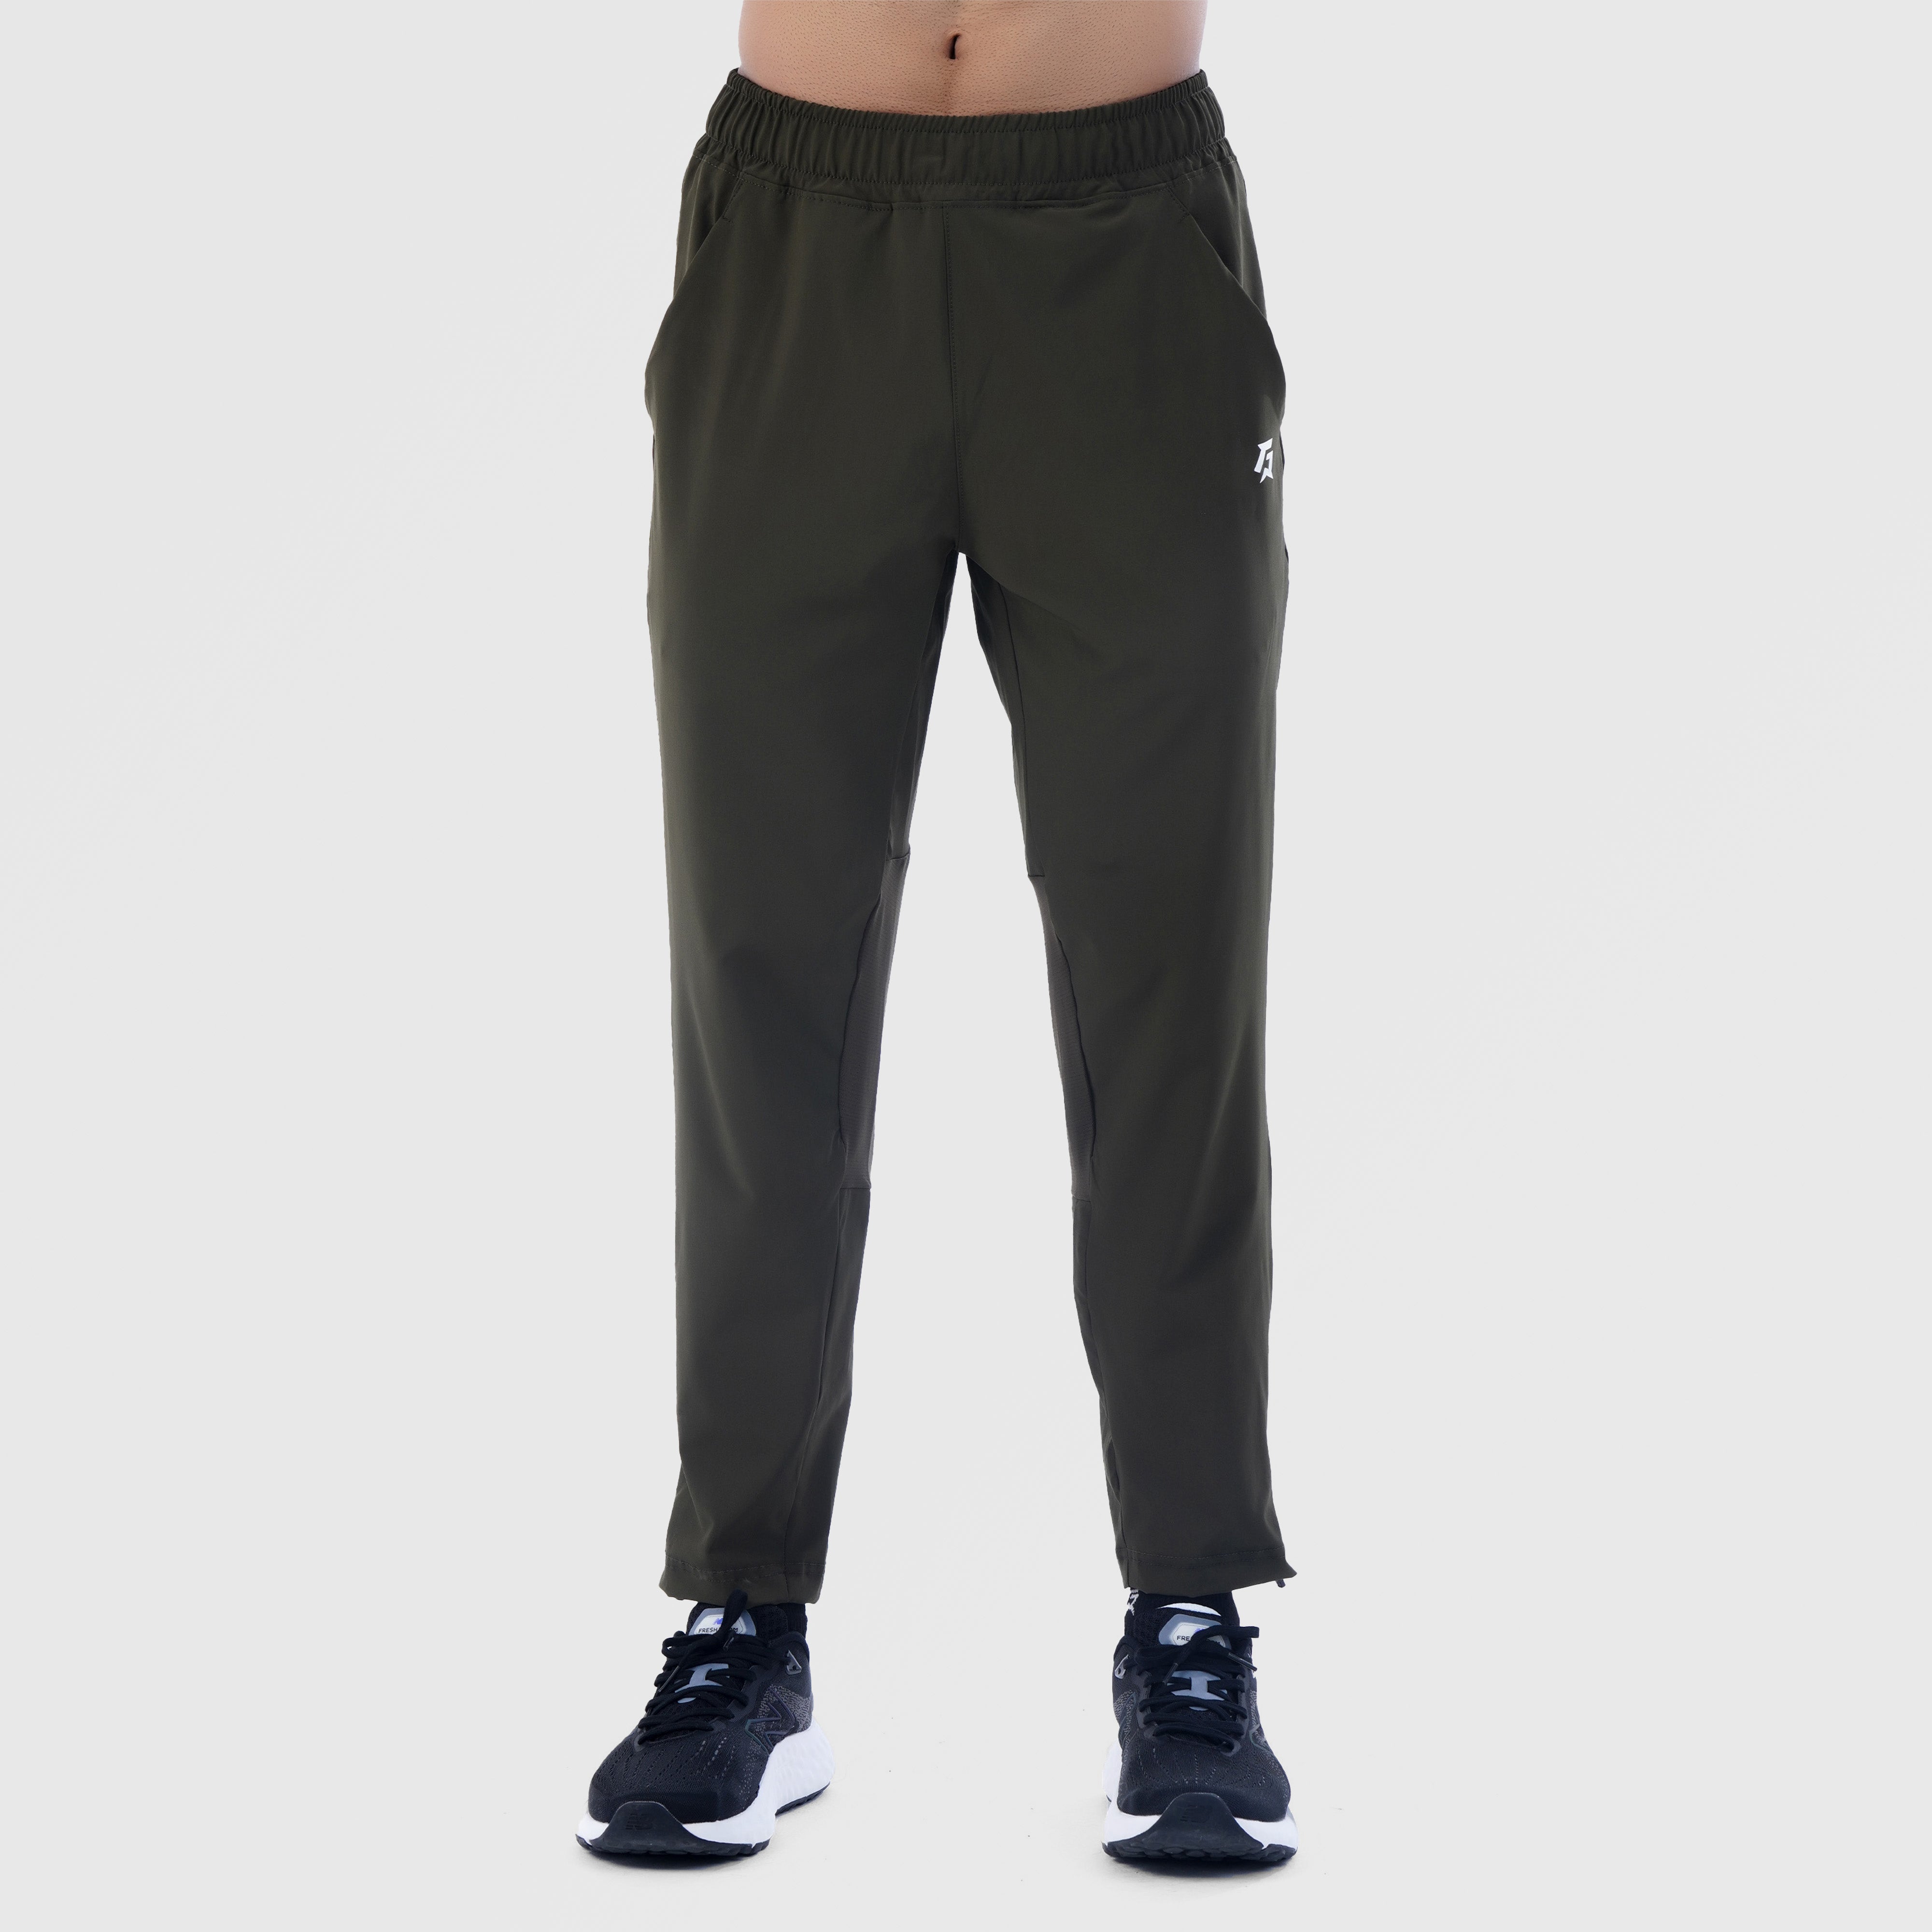 Streamline Trousers (Olive)